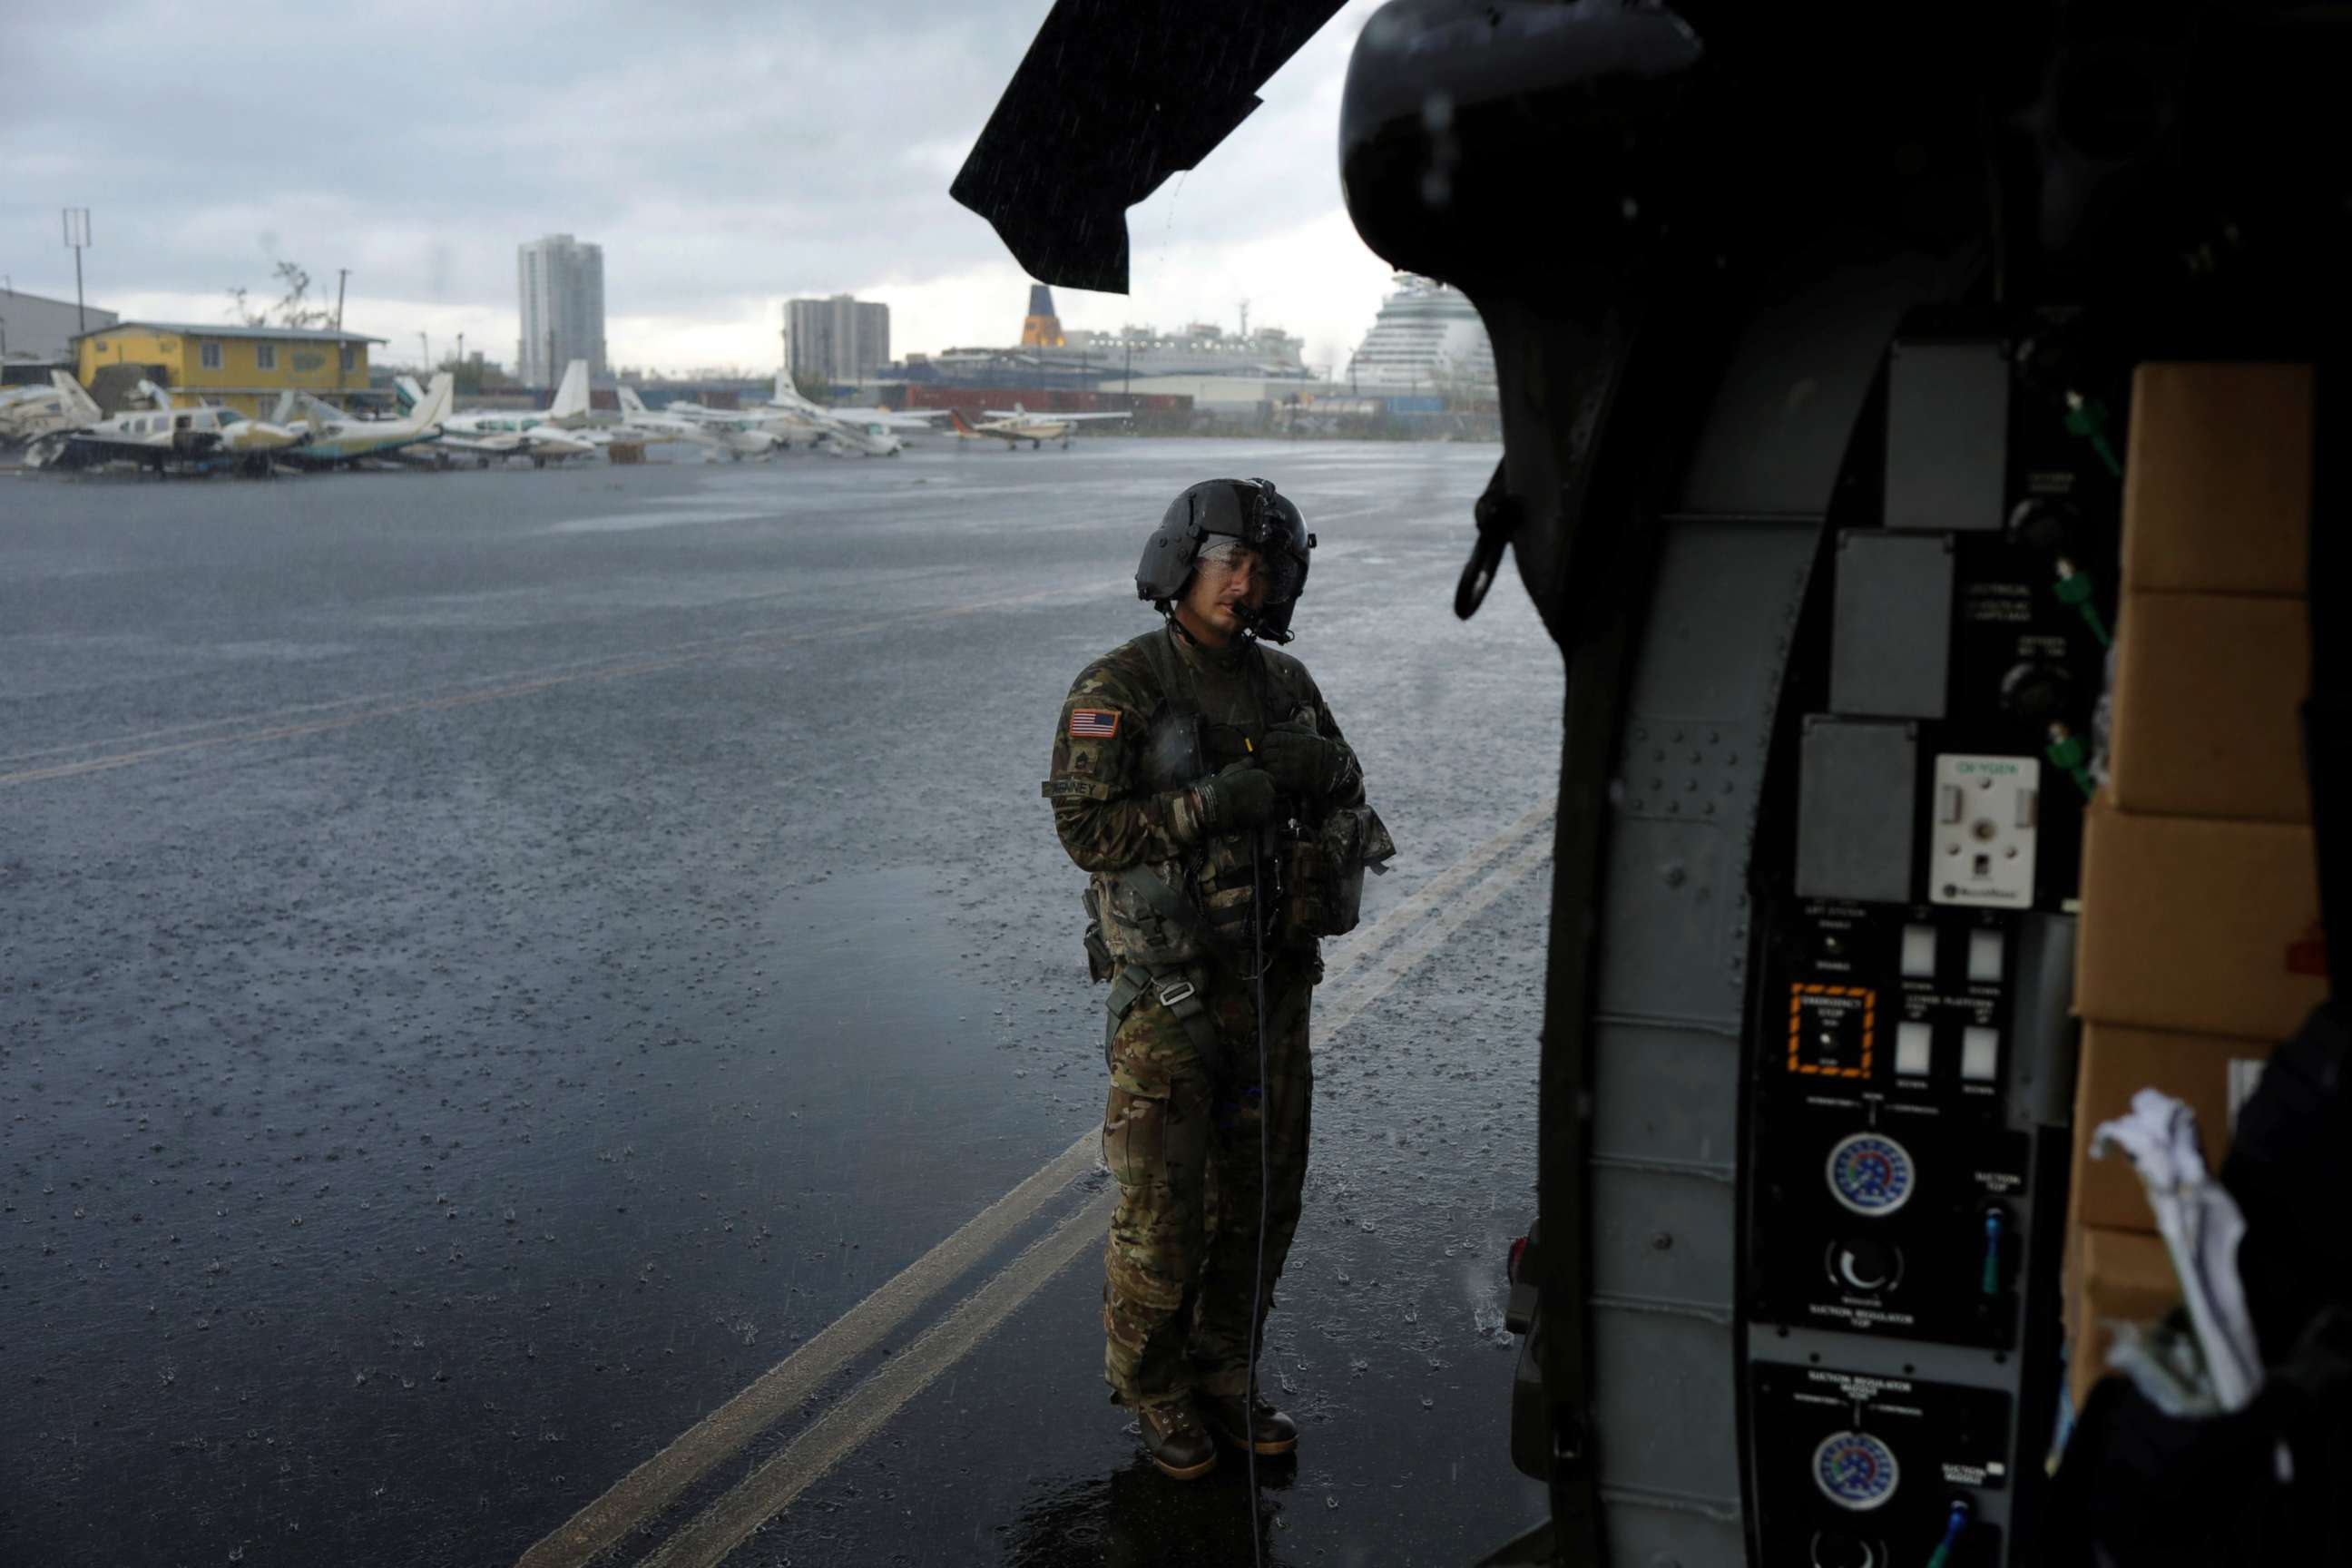 PHOTO: Crew chief Kenney shelters under the blade of an HH-60 Blackhawk helicopter from 101st Airborne Division's "Dustoff" unit preparing to take off during recovery efforts following Hurricane Maria, in Isla Grande, Puerto Rico, Oct. 6, 2017. 